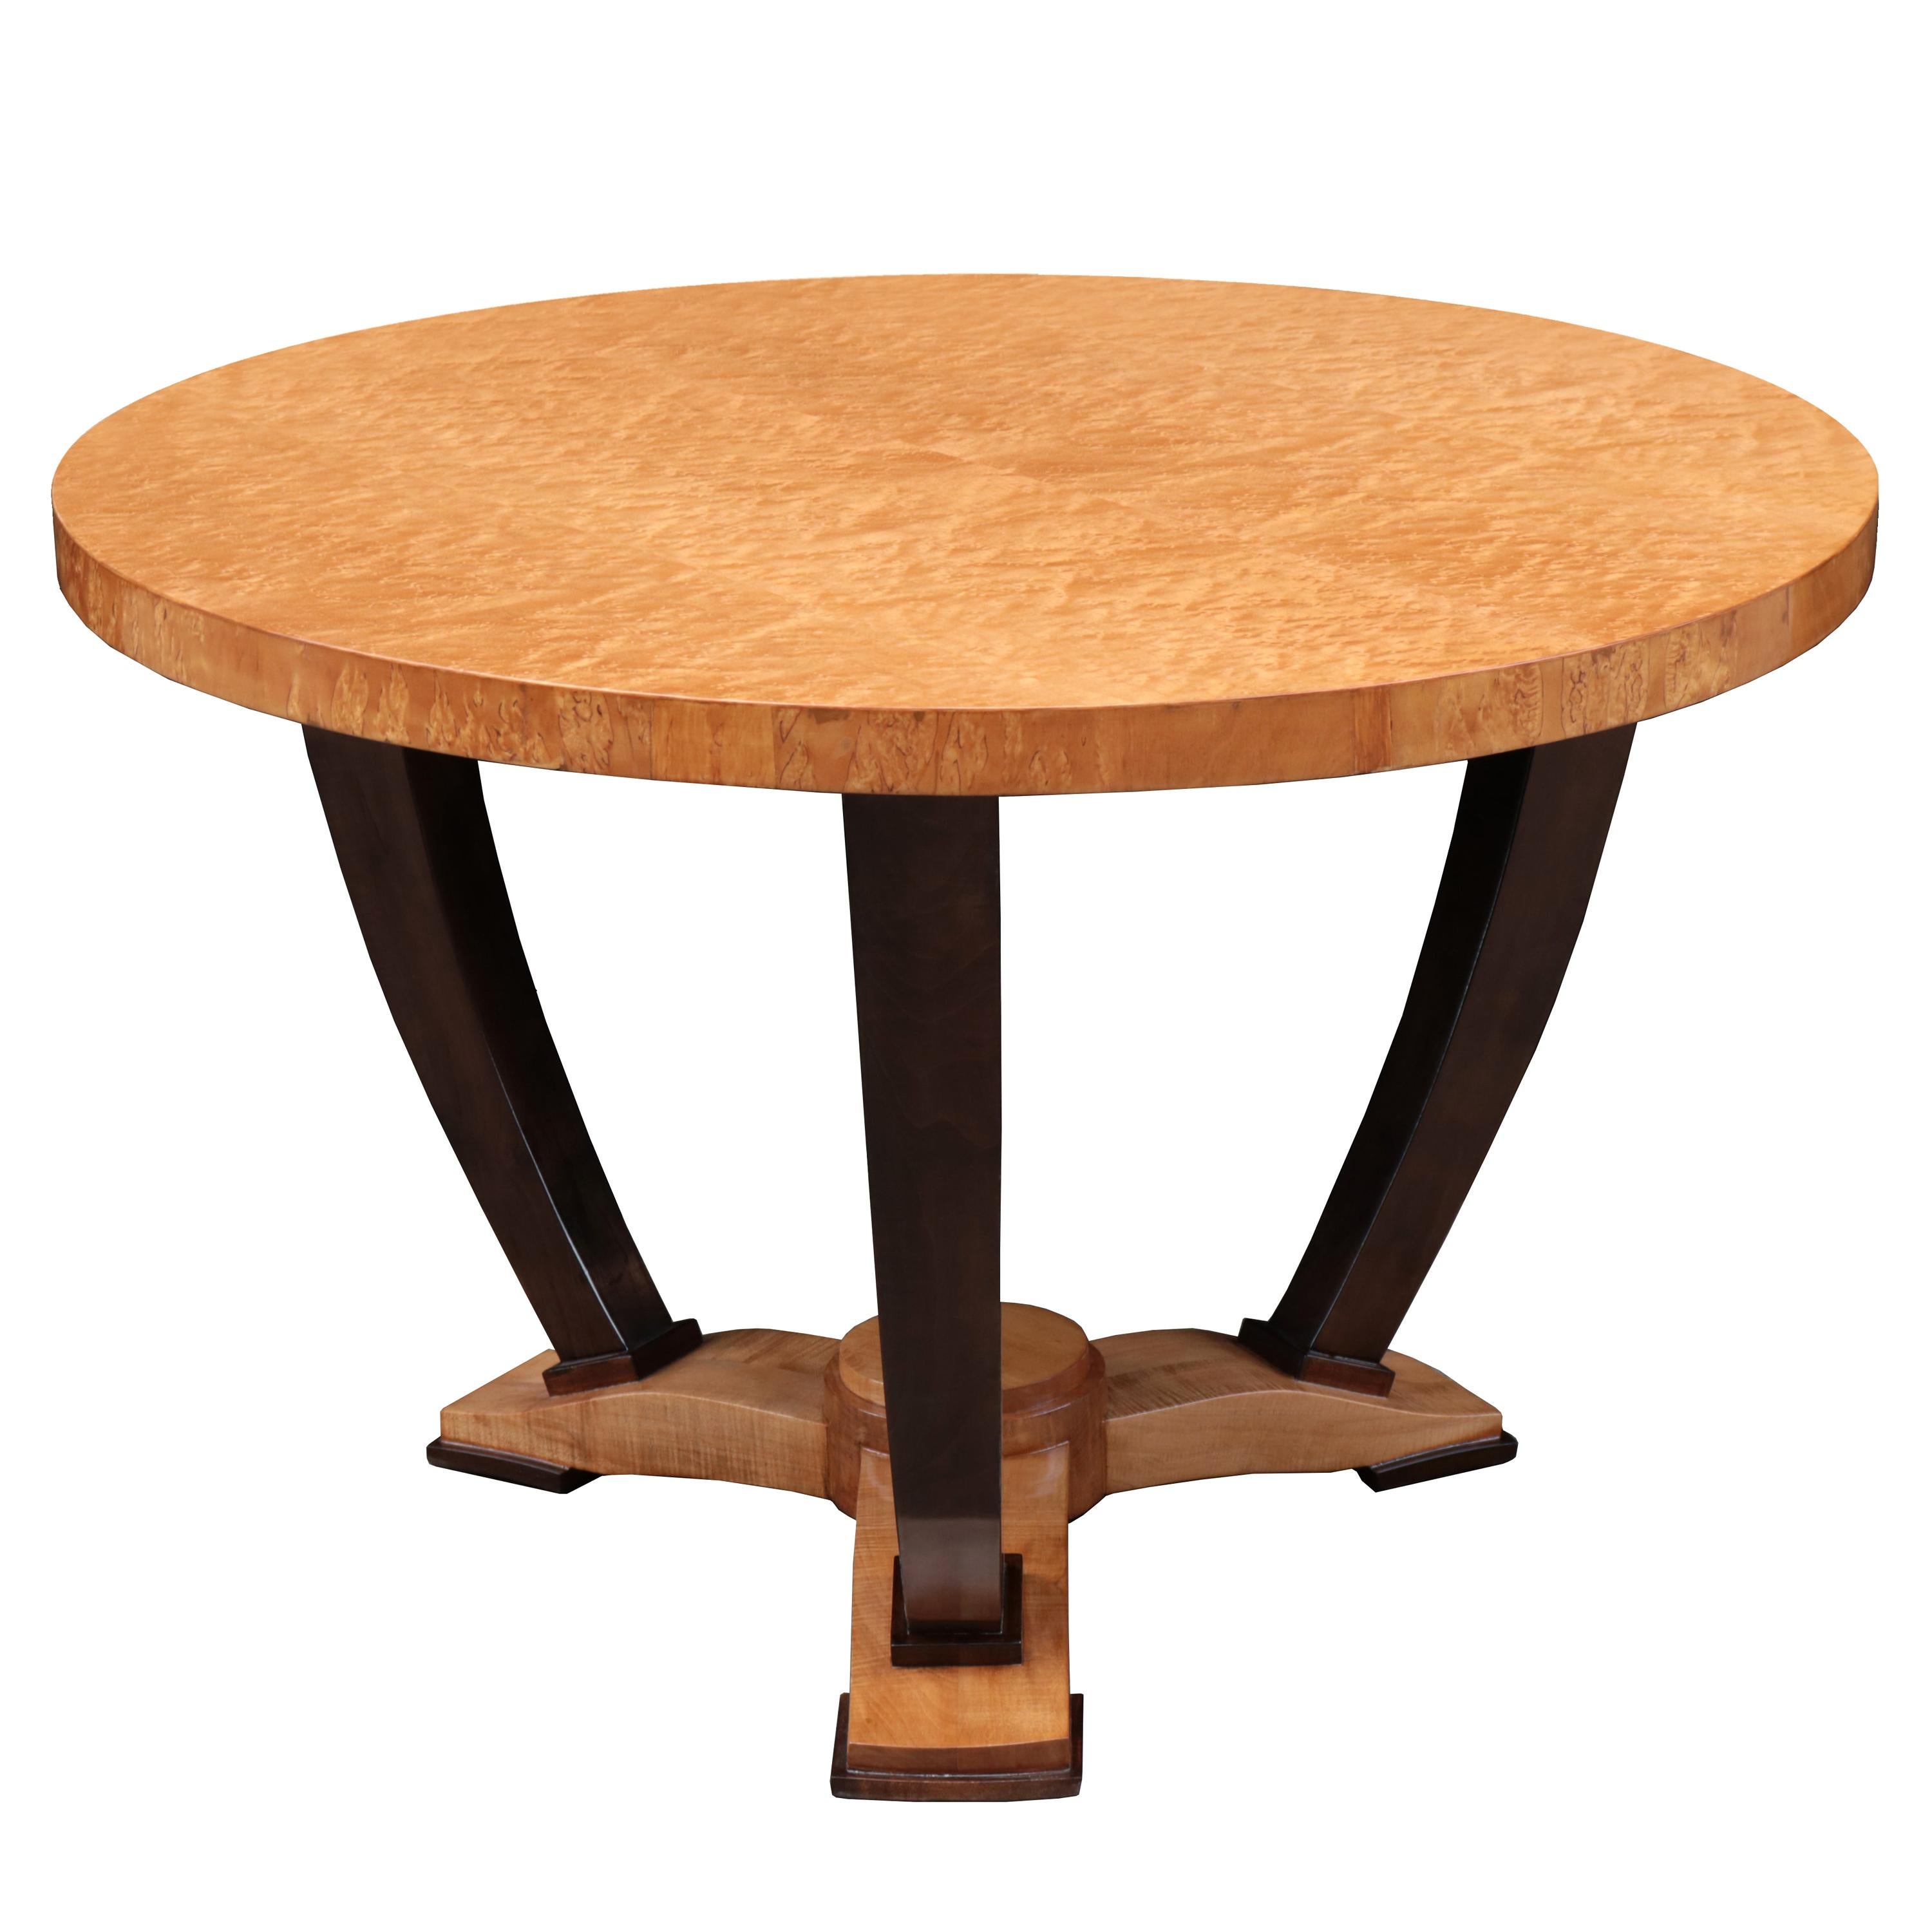 Art Deco Round Side Table